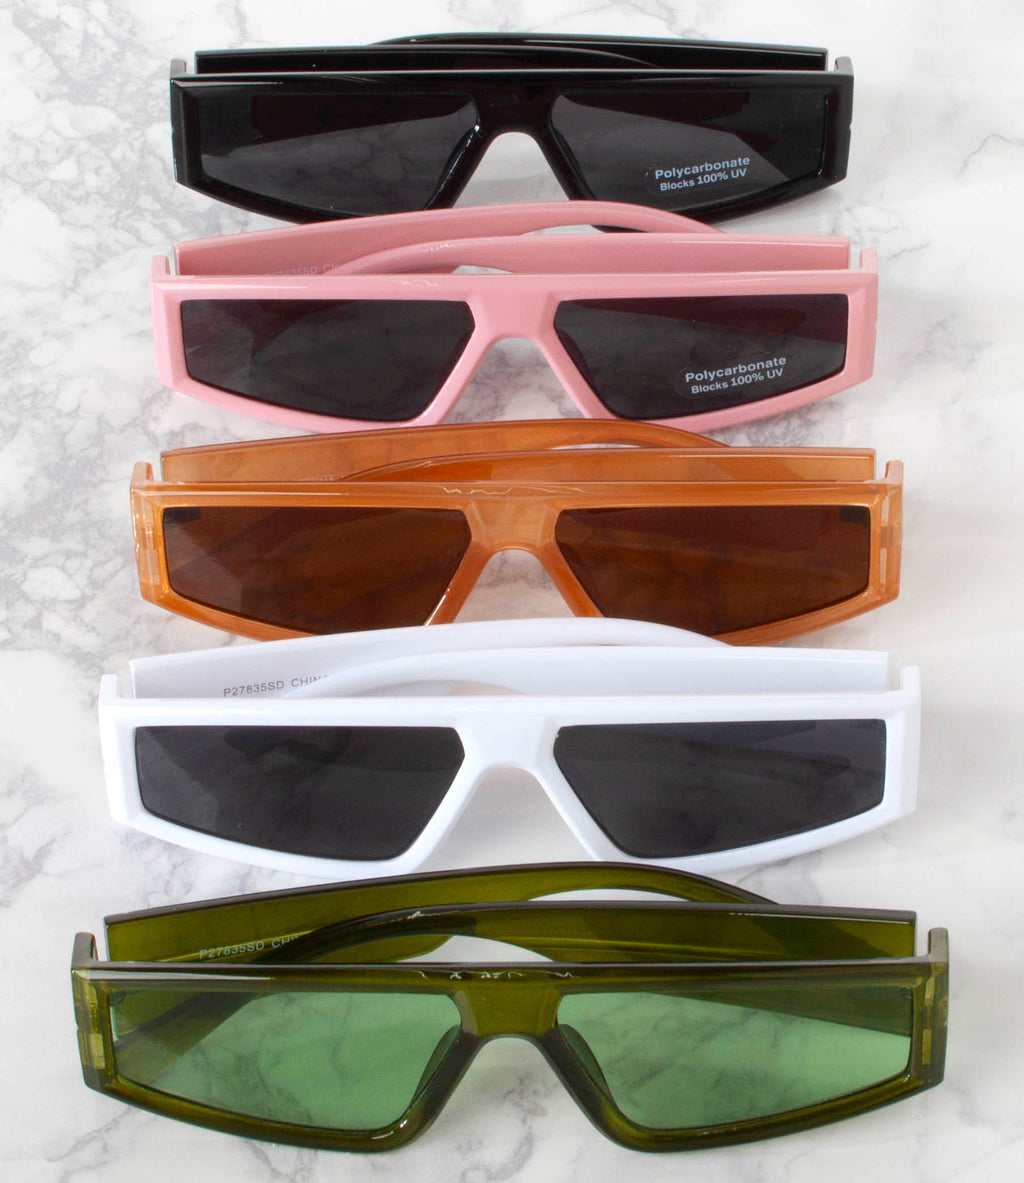 Wholesale Fashion Sunglasses - P27835SD - Pack of 12